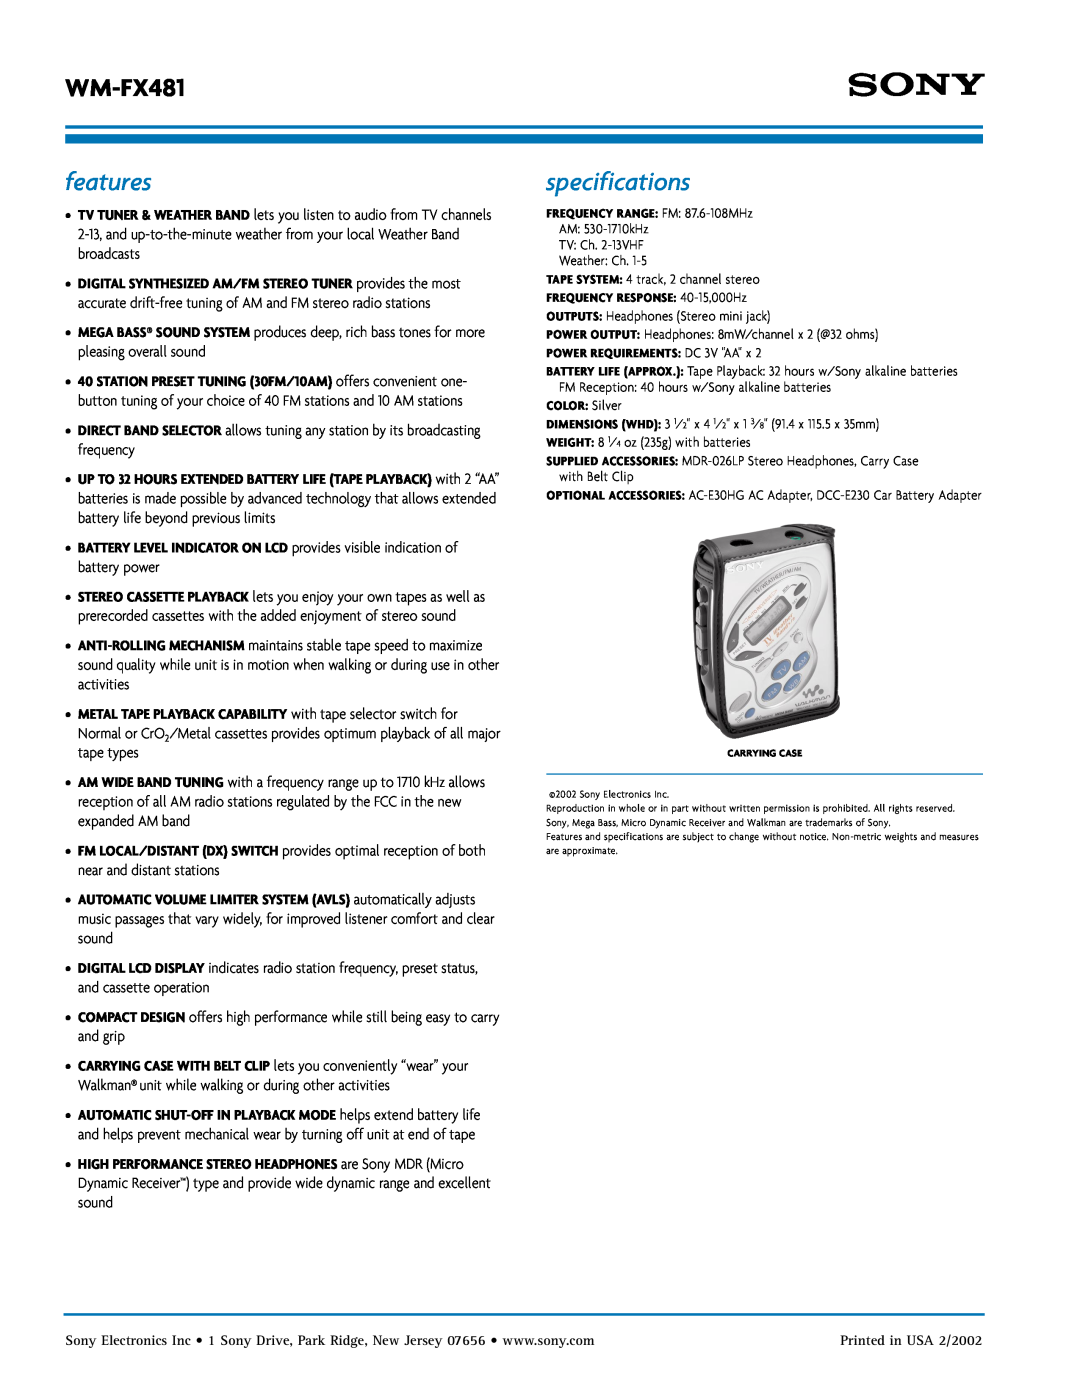 Sony WM-FX481 manual features, specifications 